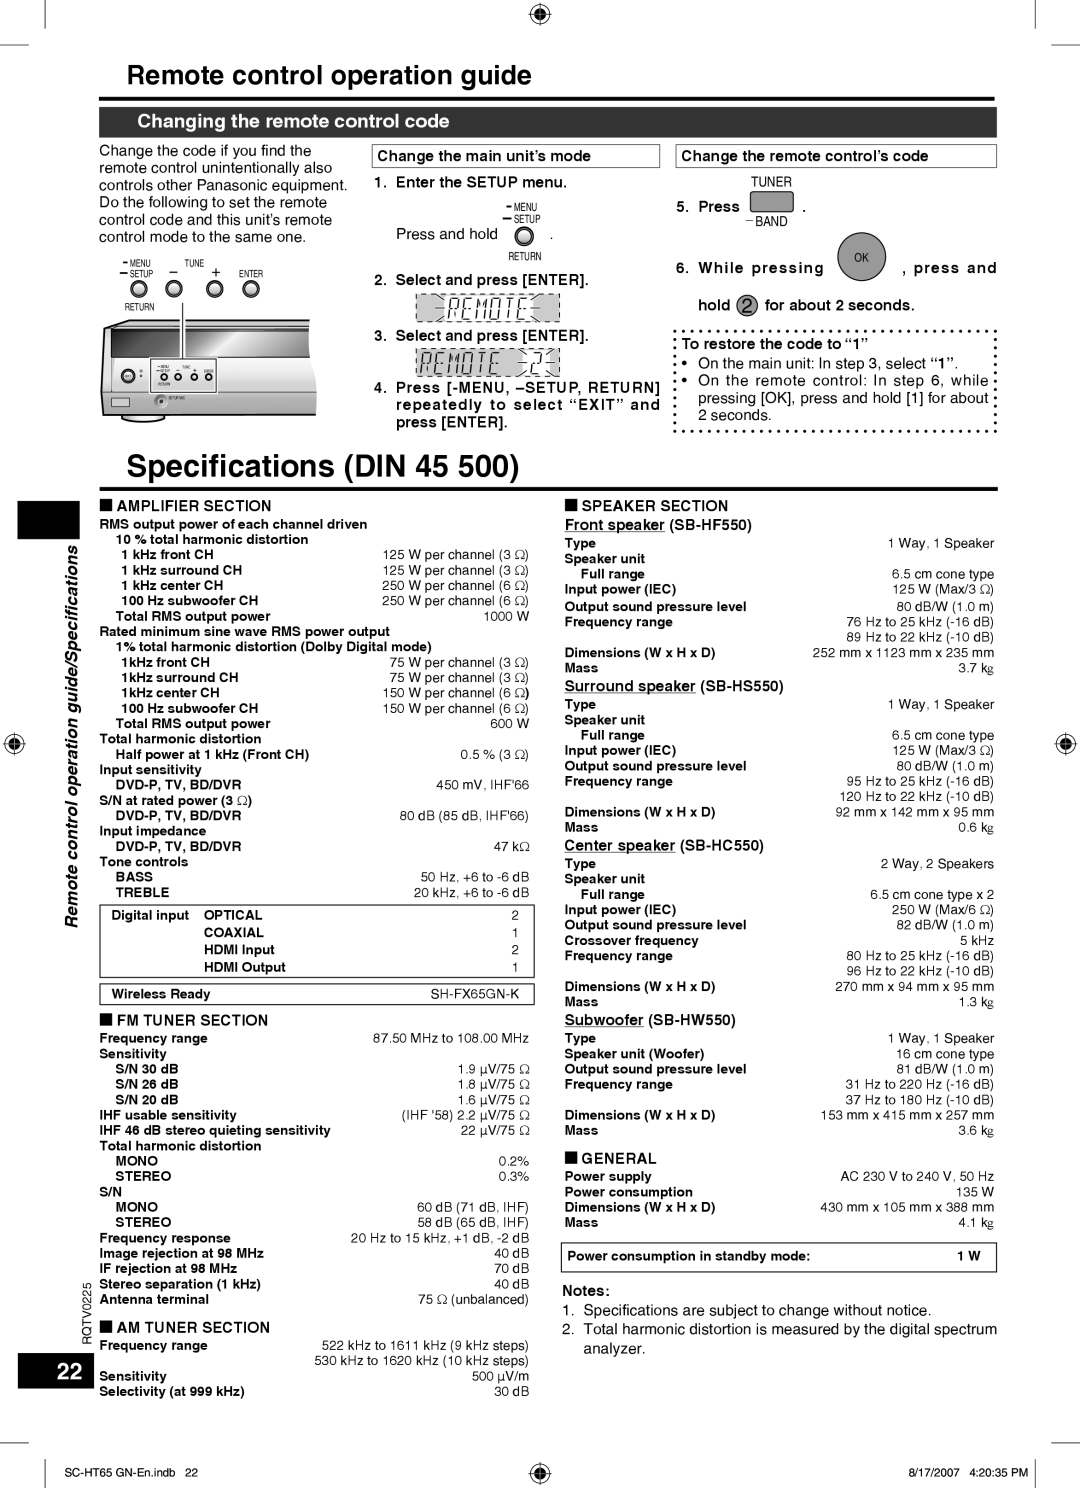 Panasonic SC-HT65 manual Speciﬁcations DIN 45, Remote control operation guide, Changing the remote control code 